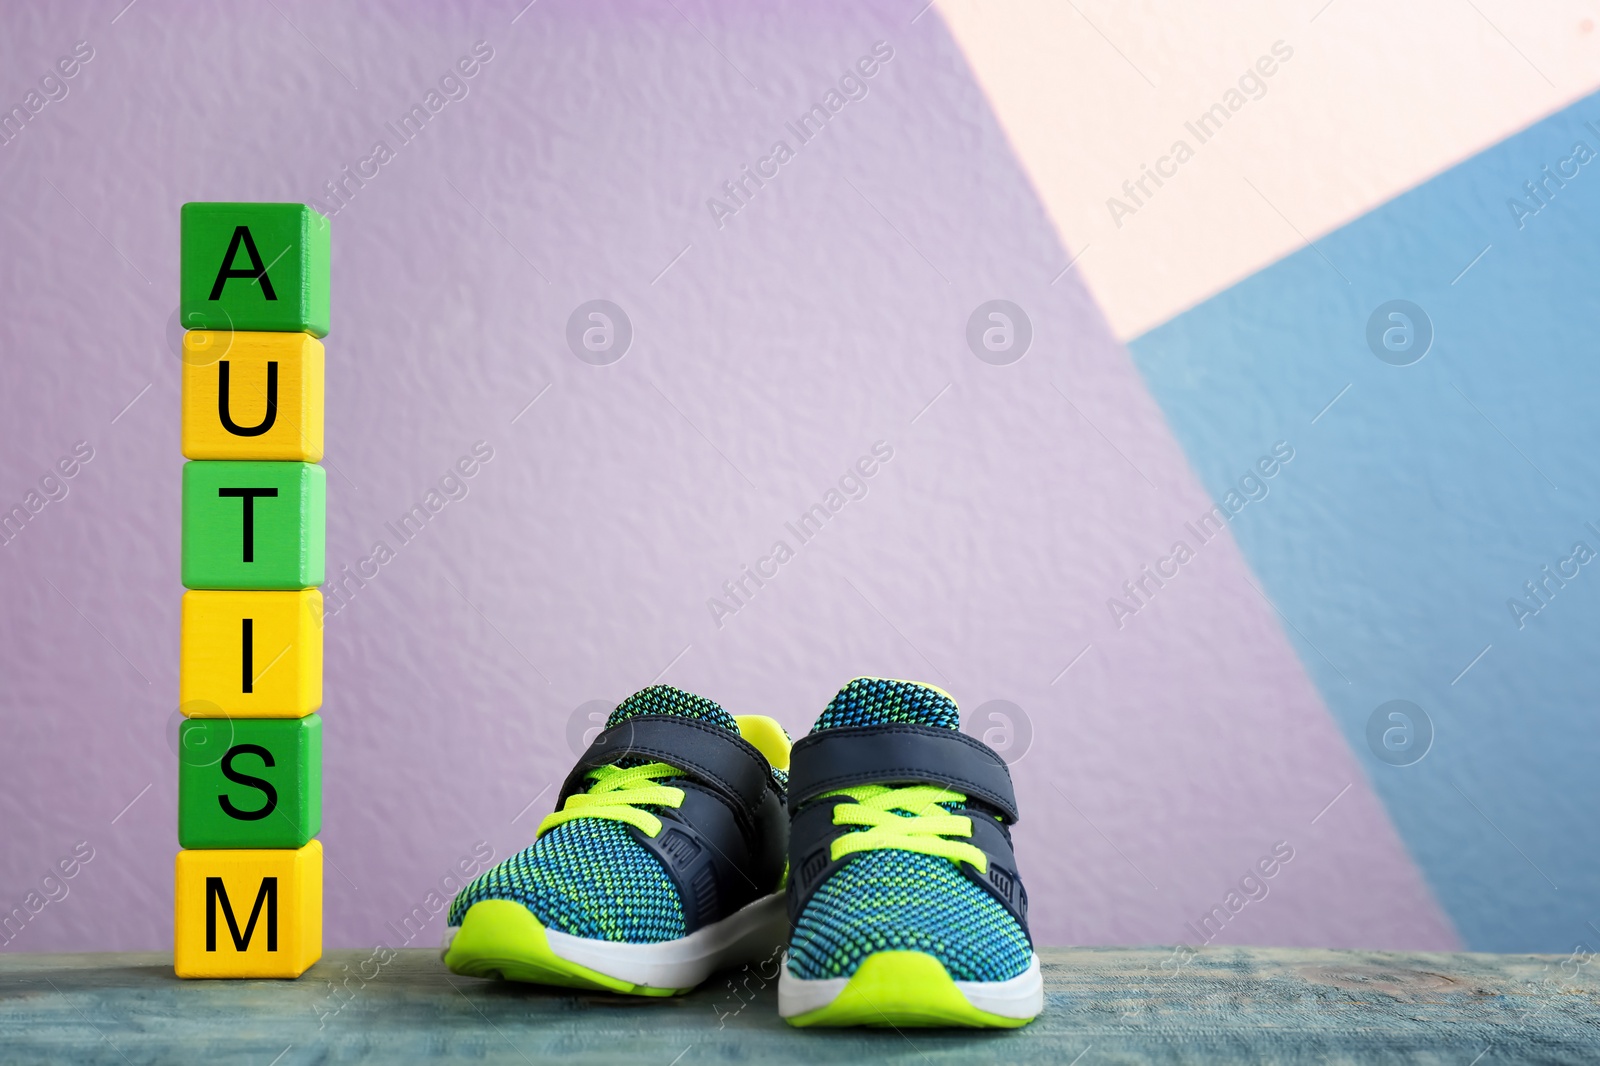 Photo of Training shoes and cubes with word "Autism" on table